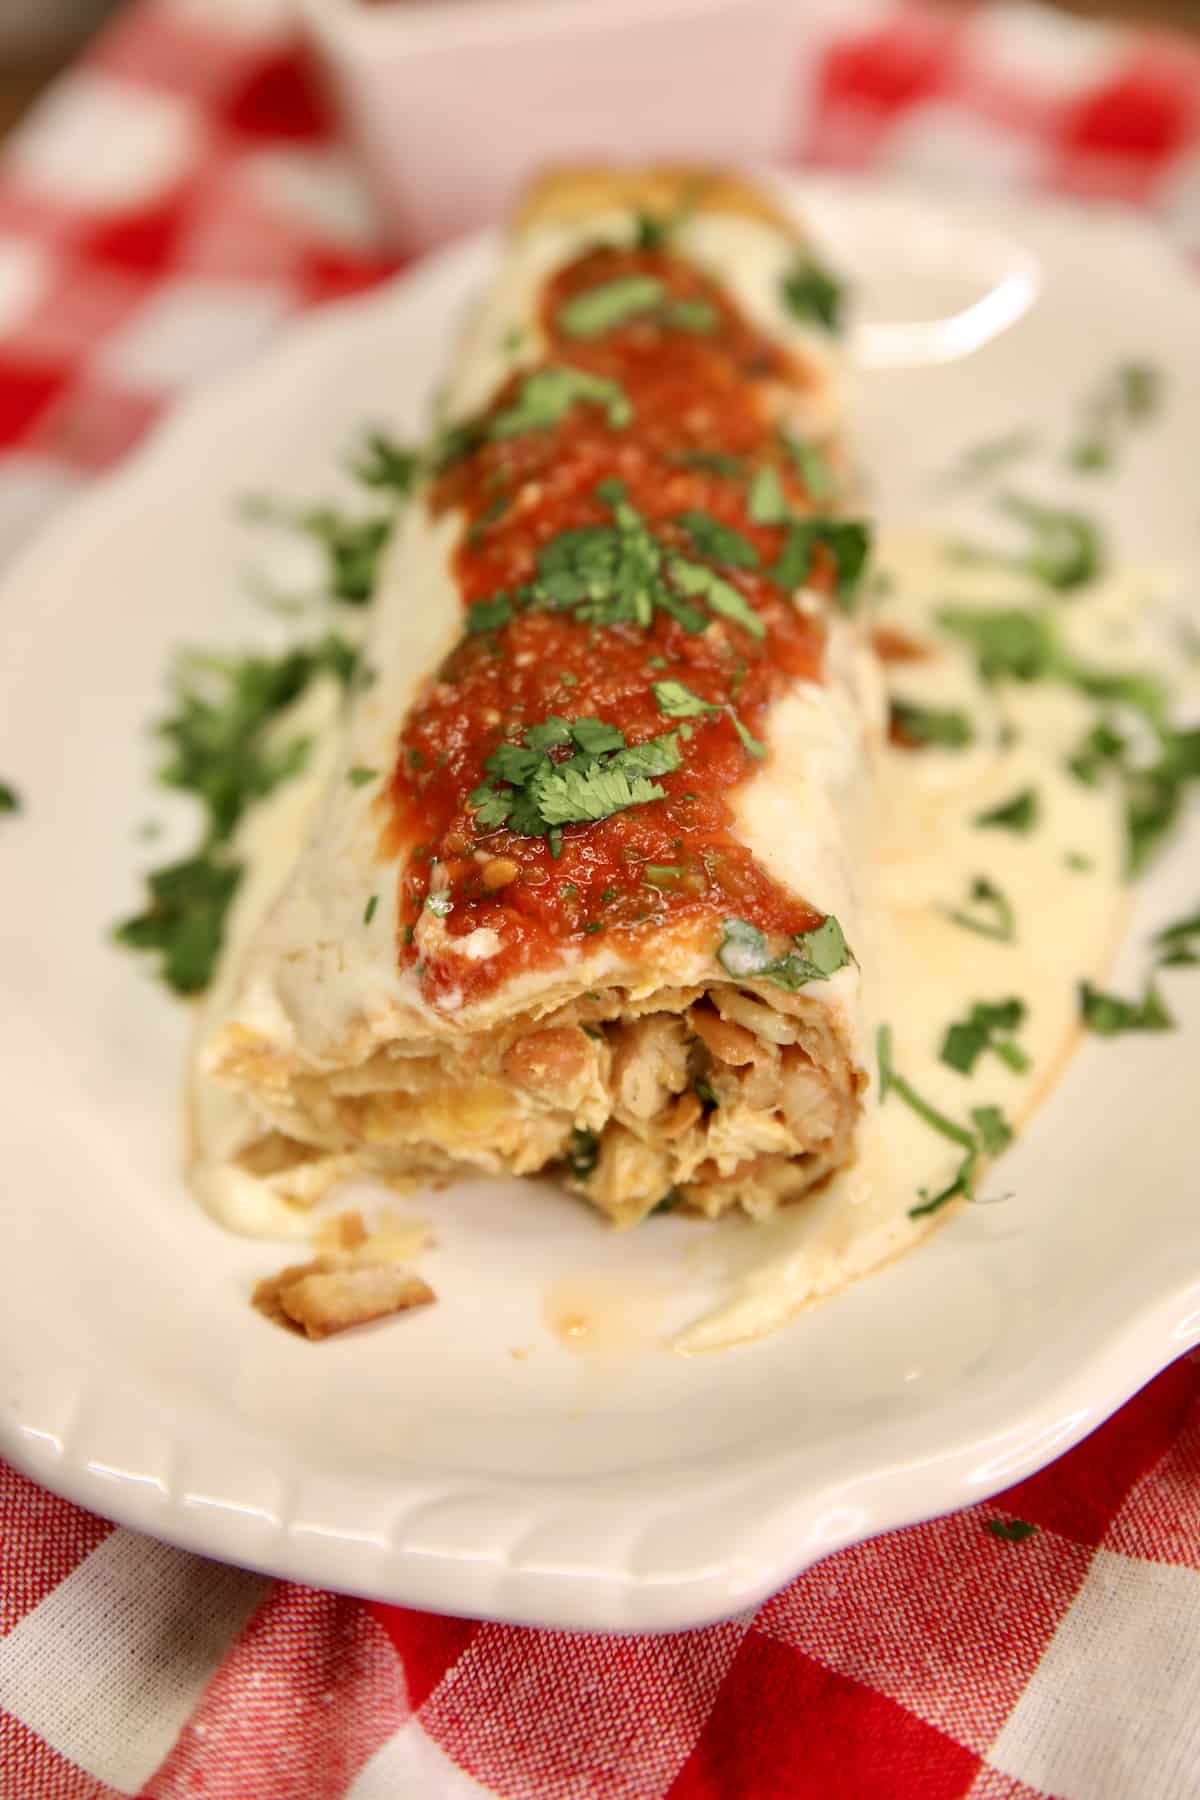 Burrito with chicken rice and beans. Topped with sour cream and salsa.